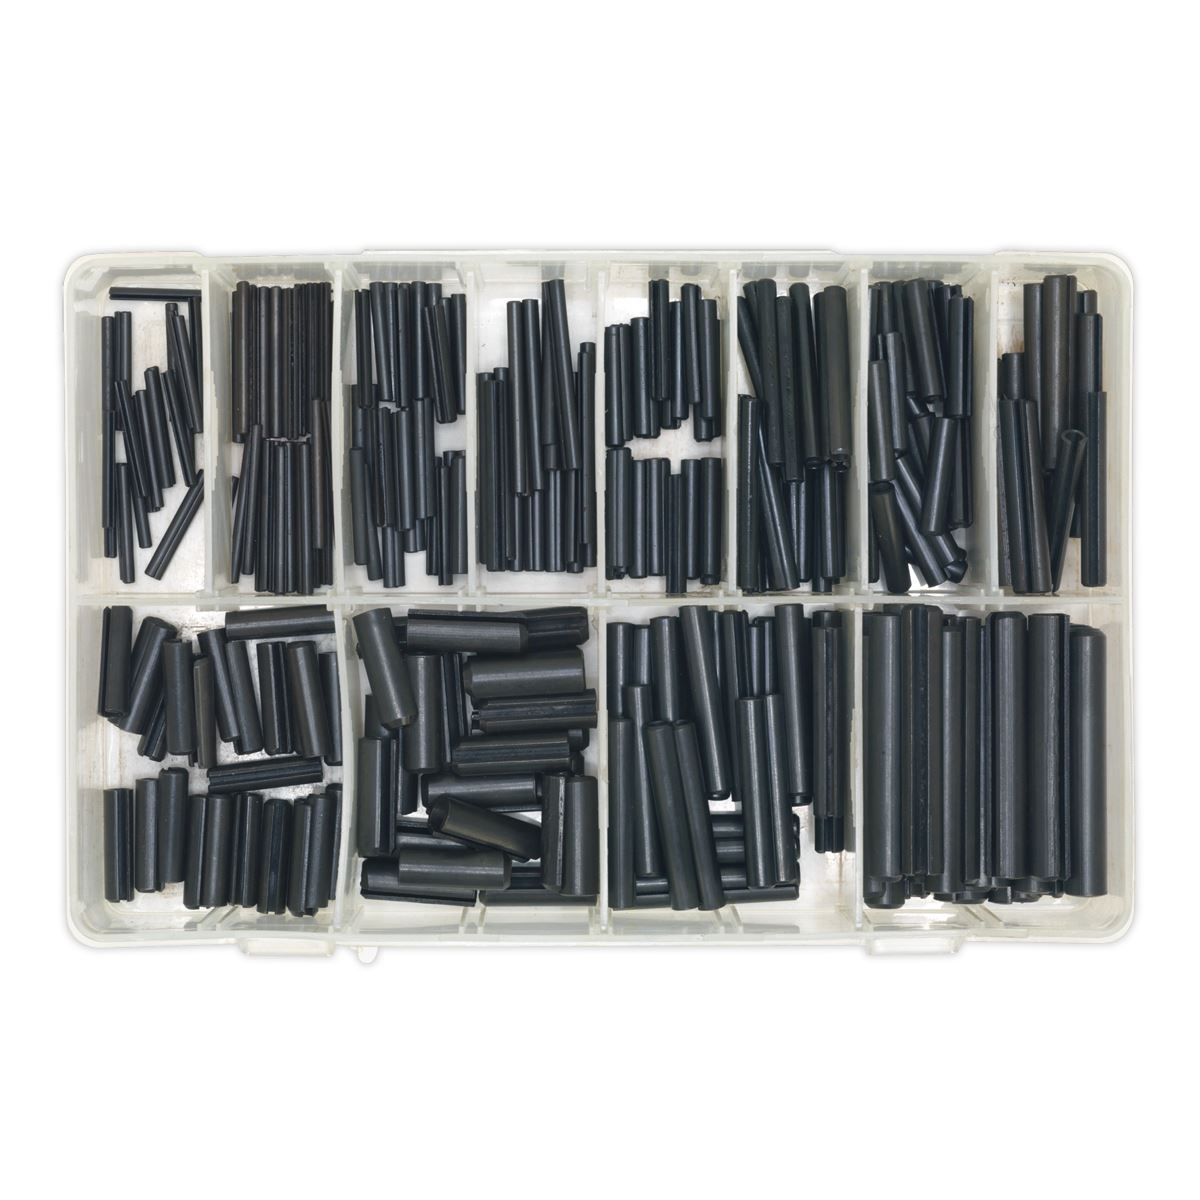 Sealey Spring Roll Pin Assortment 300pc - Imperial